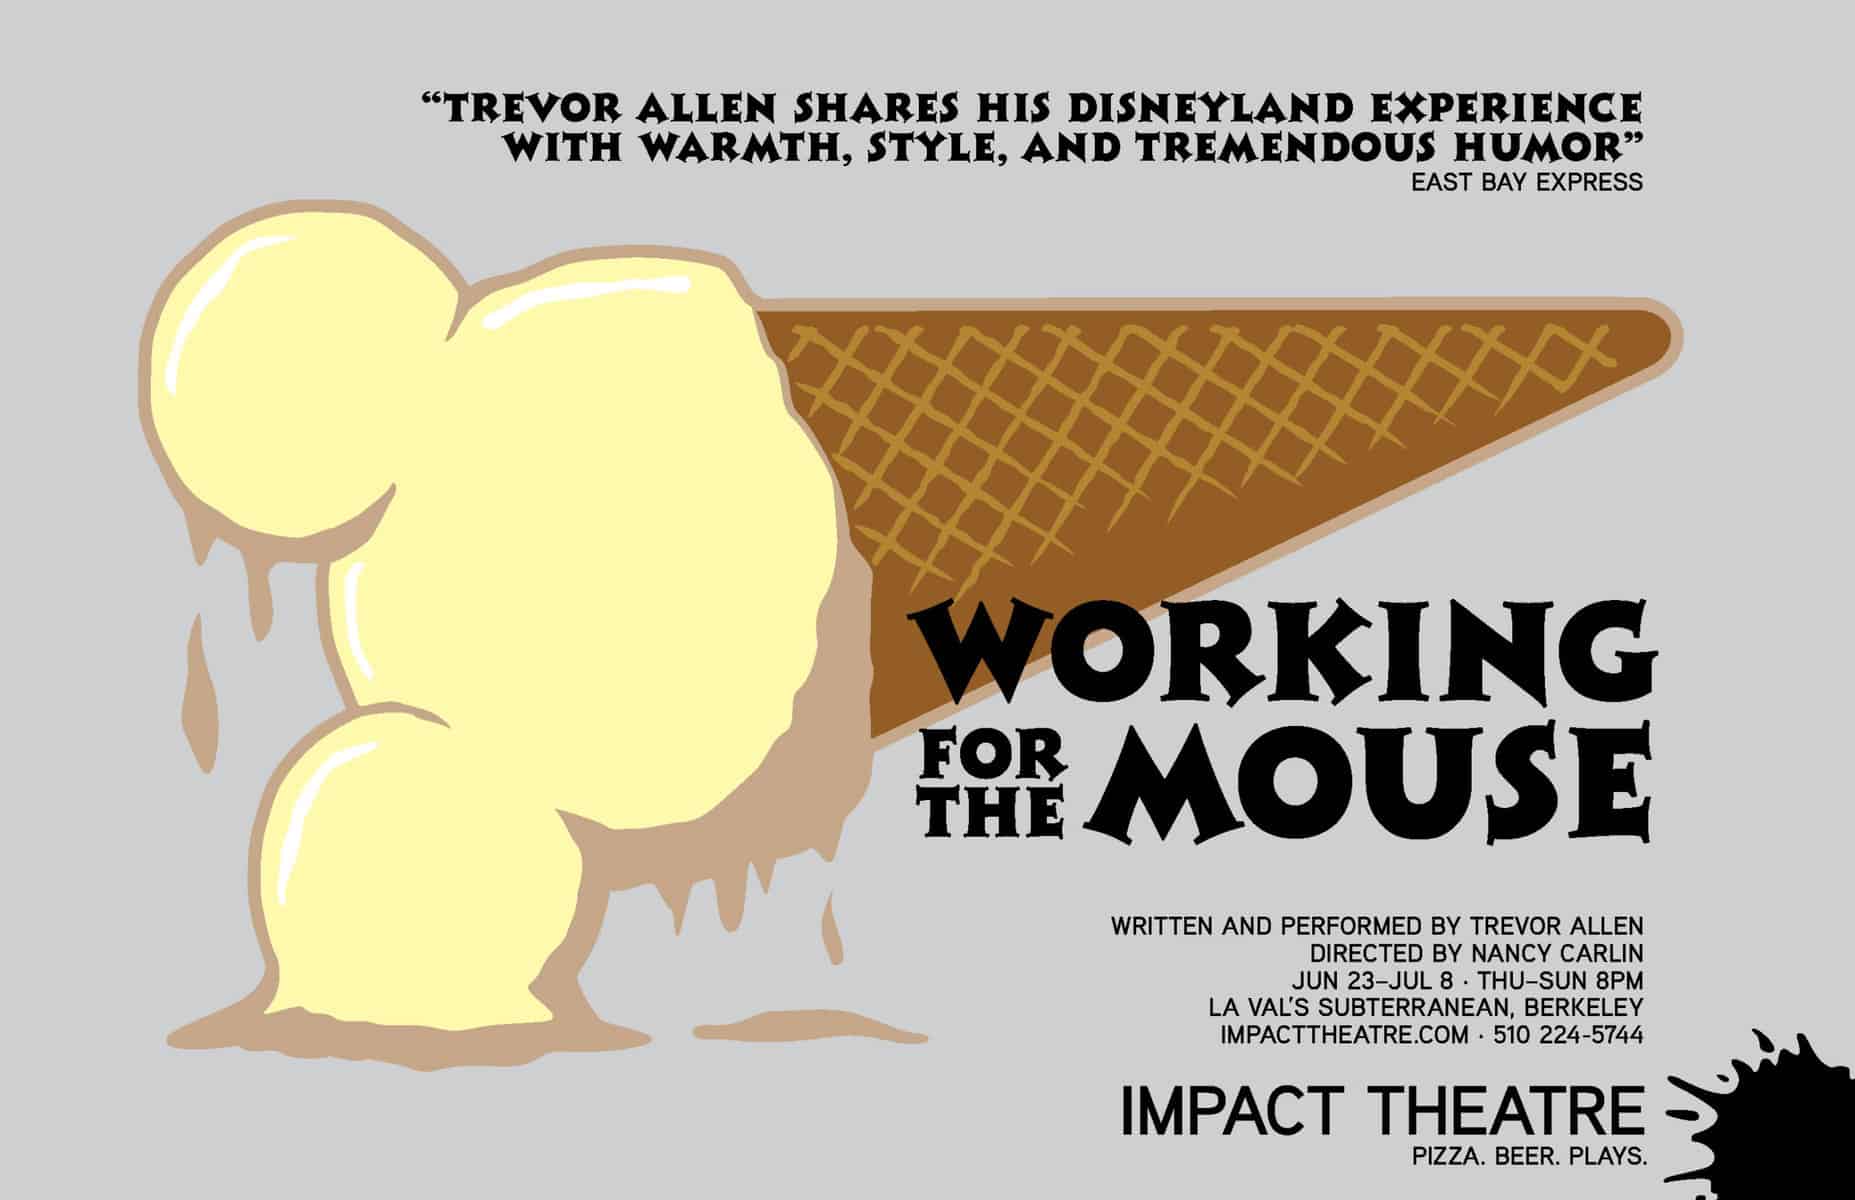 Poster for Trevor Allen's solo show "Working for the Mouse" at Impact Theatre. The image is a stylized illustration, as if from a graphic novel or comic, of an ice cream cone with scoops of vanilla ice cream in the shape of Mickey ears, but that it fell on the ground and is slowly melting into oblivion.